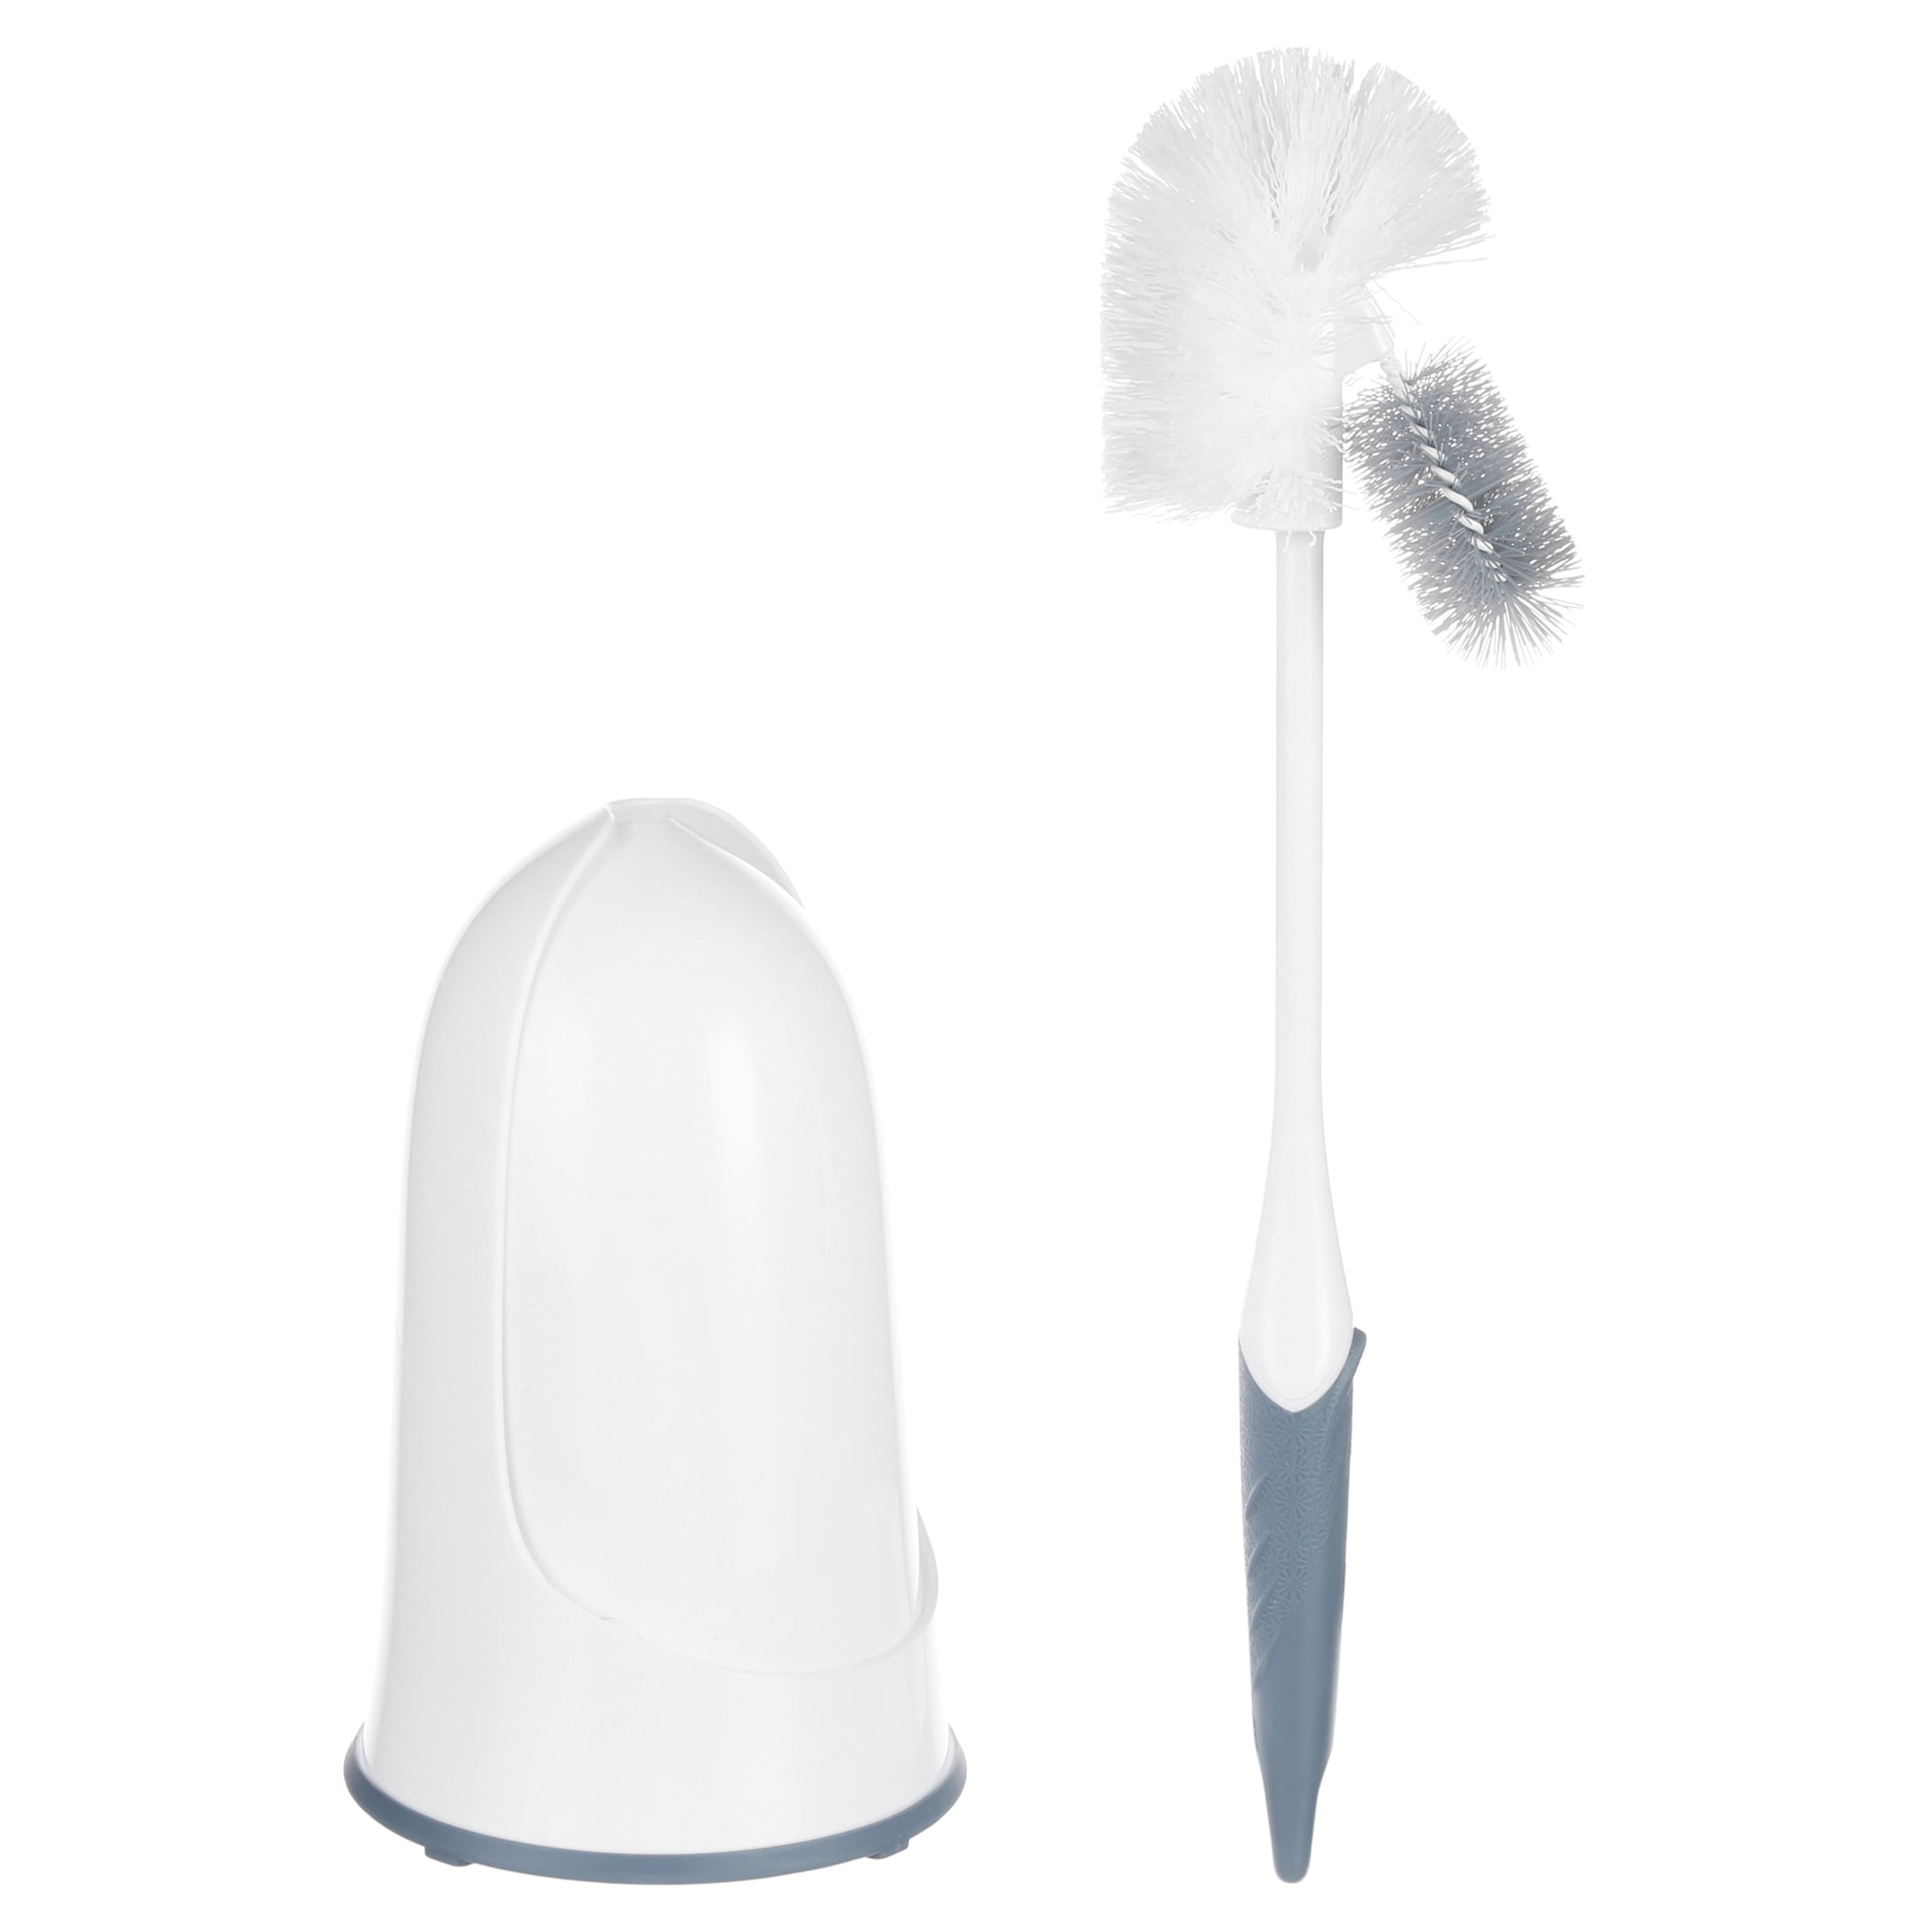 Great Value Closed Bowl Brush & Caddy Value Pack, 2 Count, White